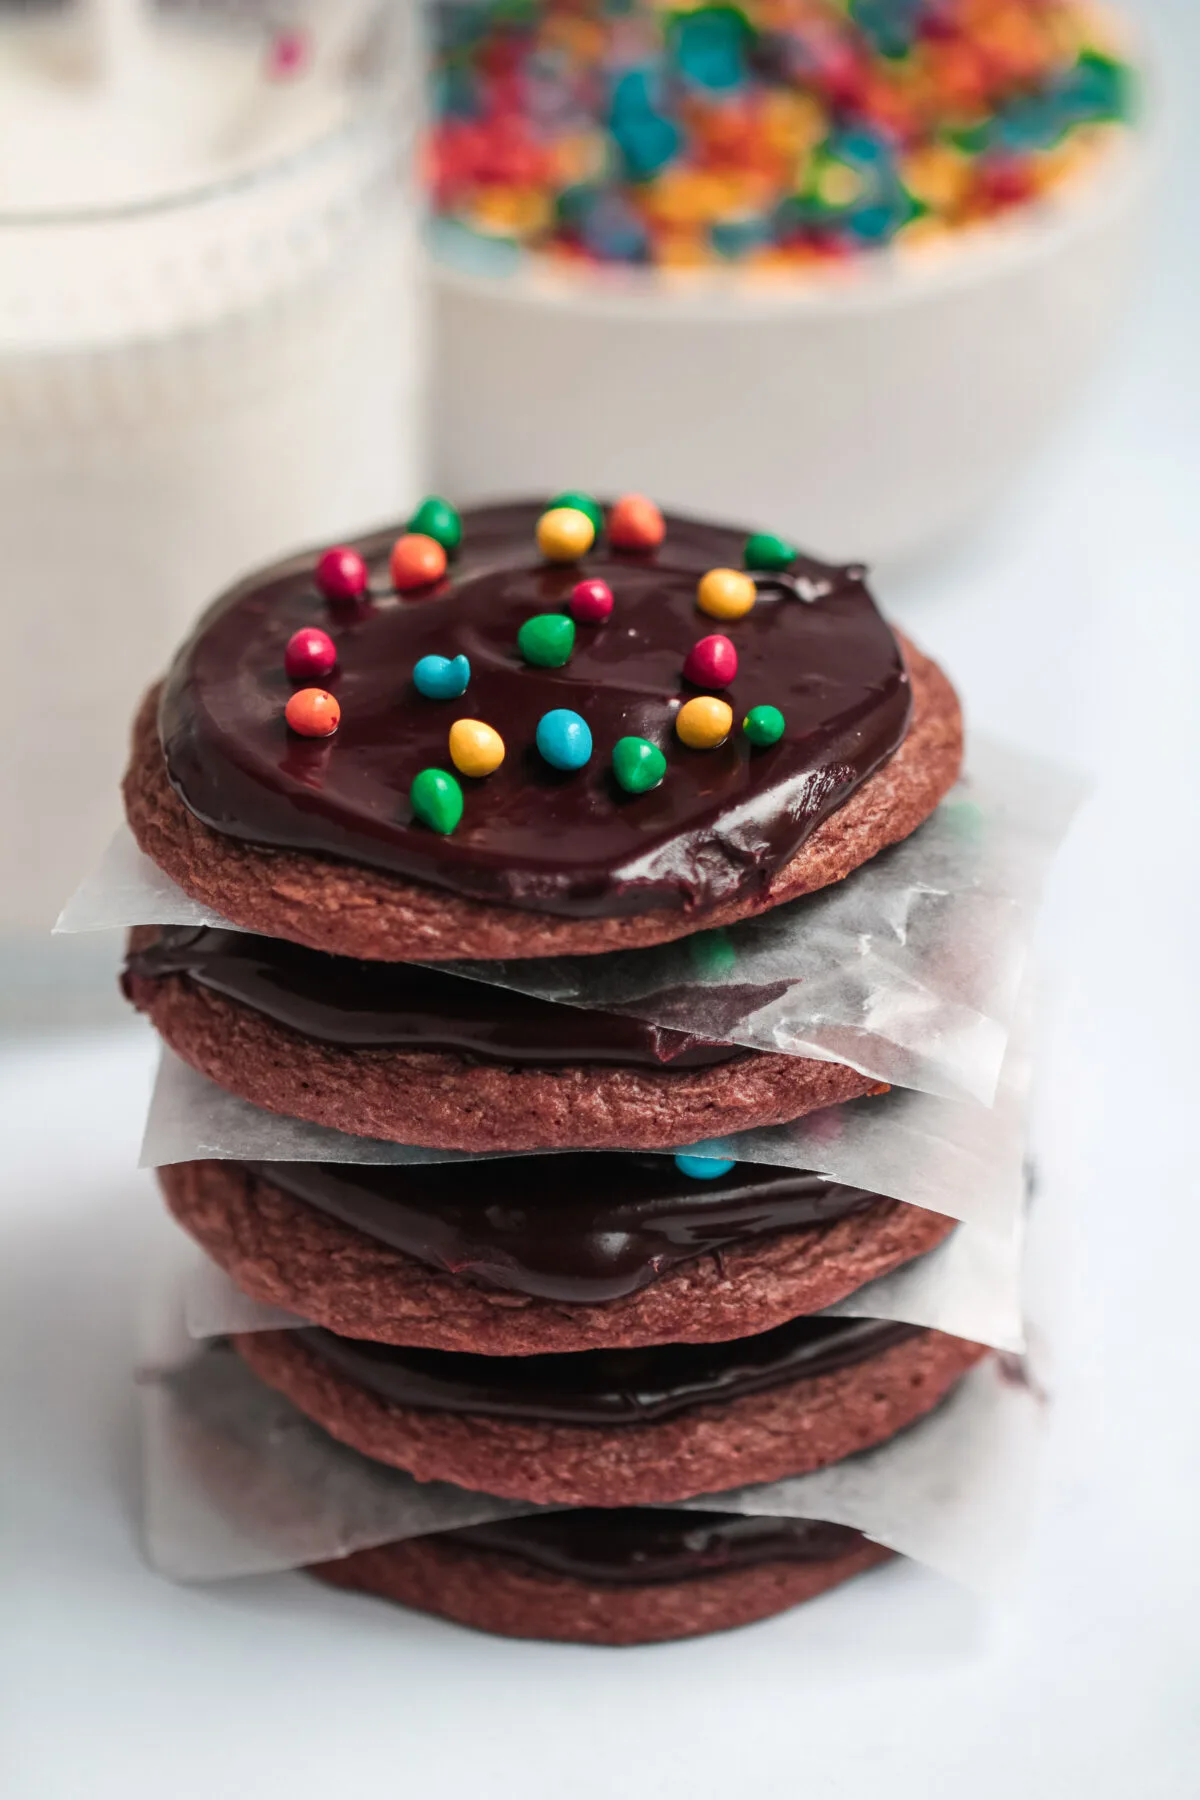 Indulge in nostalgia with Cosmic Brownie Cookies – a classic childhood treat reimagined! Experience the joy of every rich, chocolatey bite!